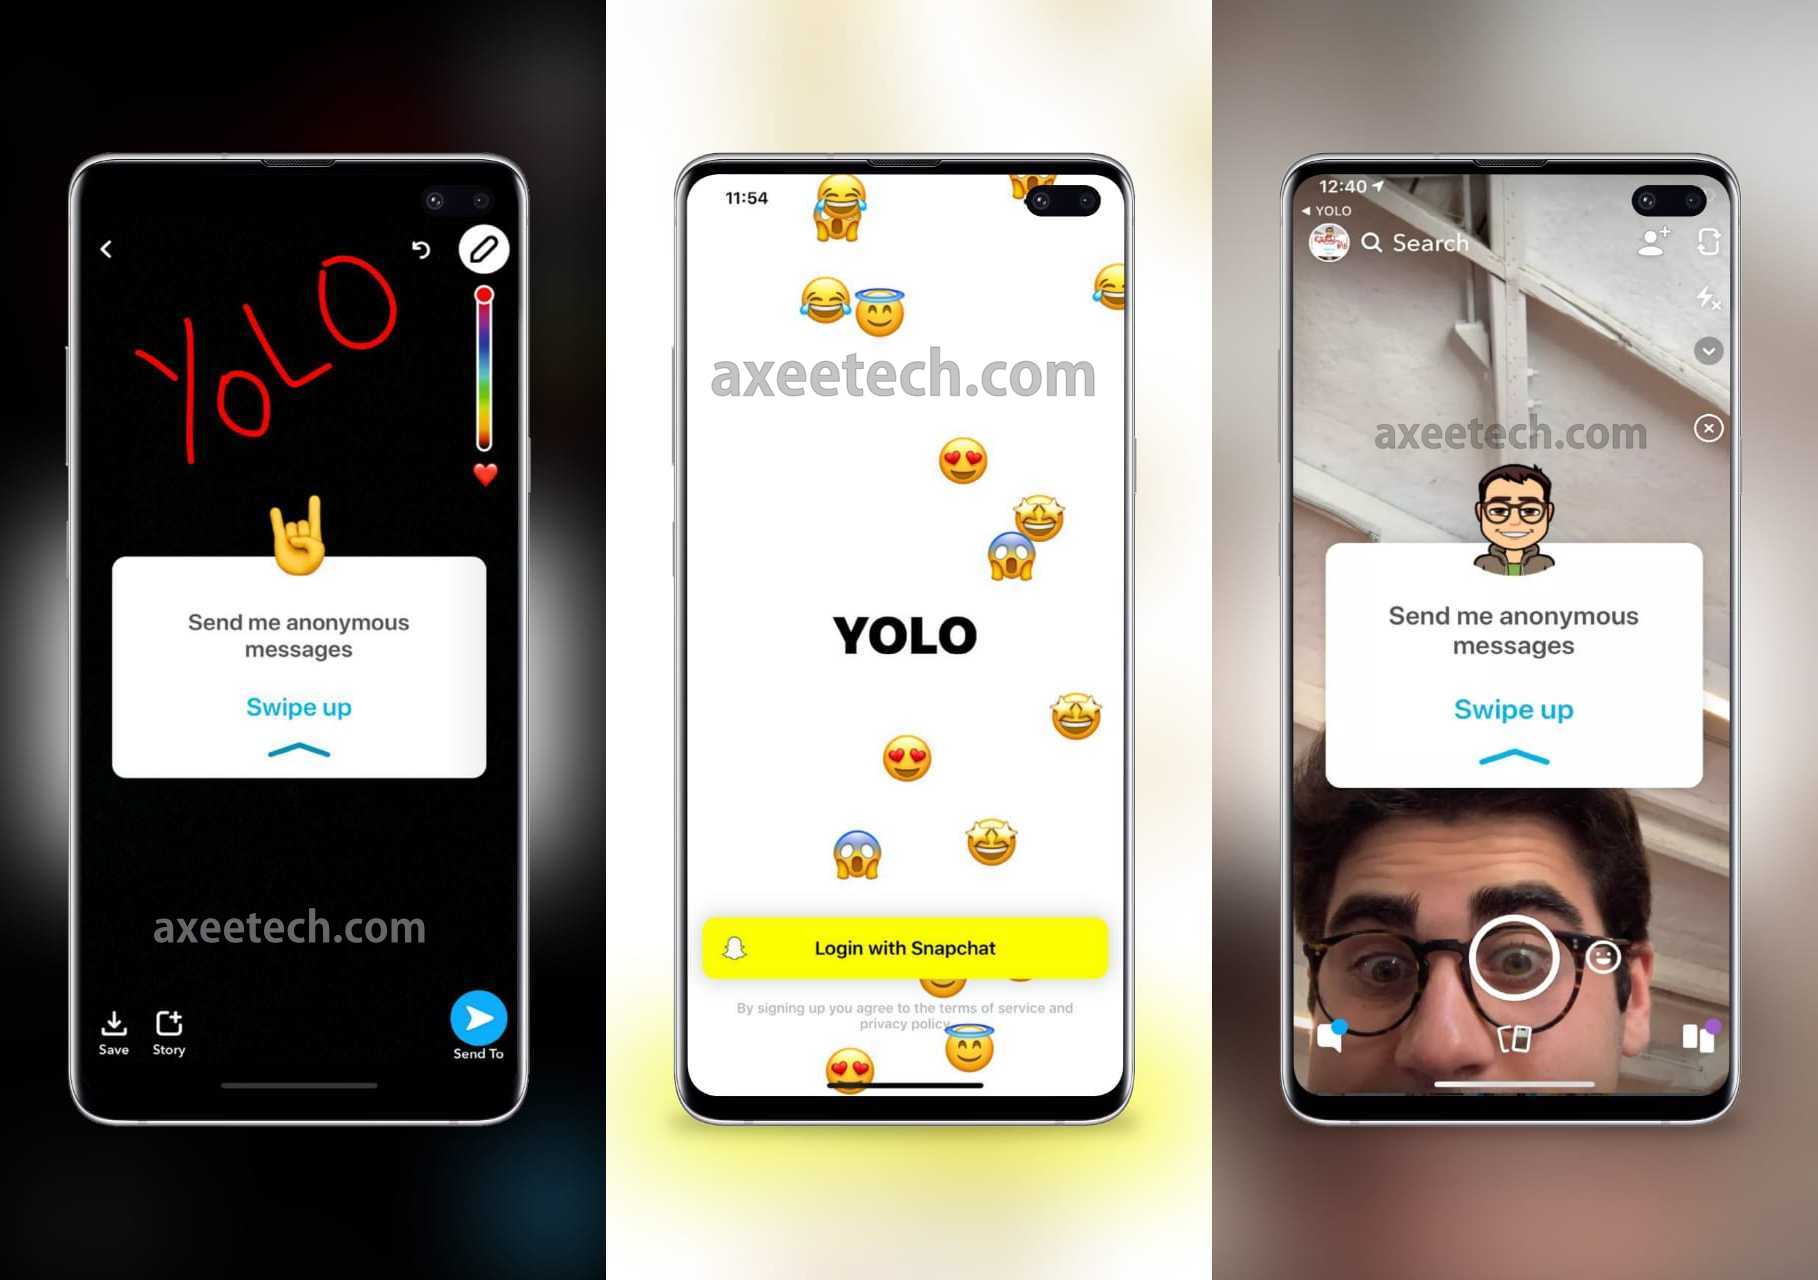 How to Do Yolo on Snapchat Android